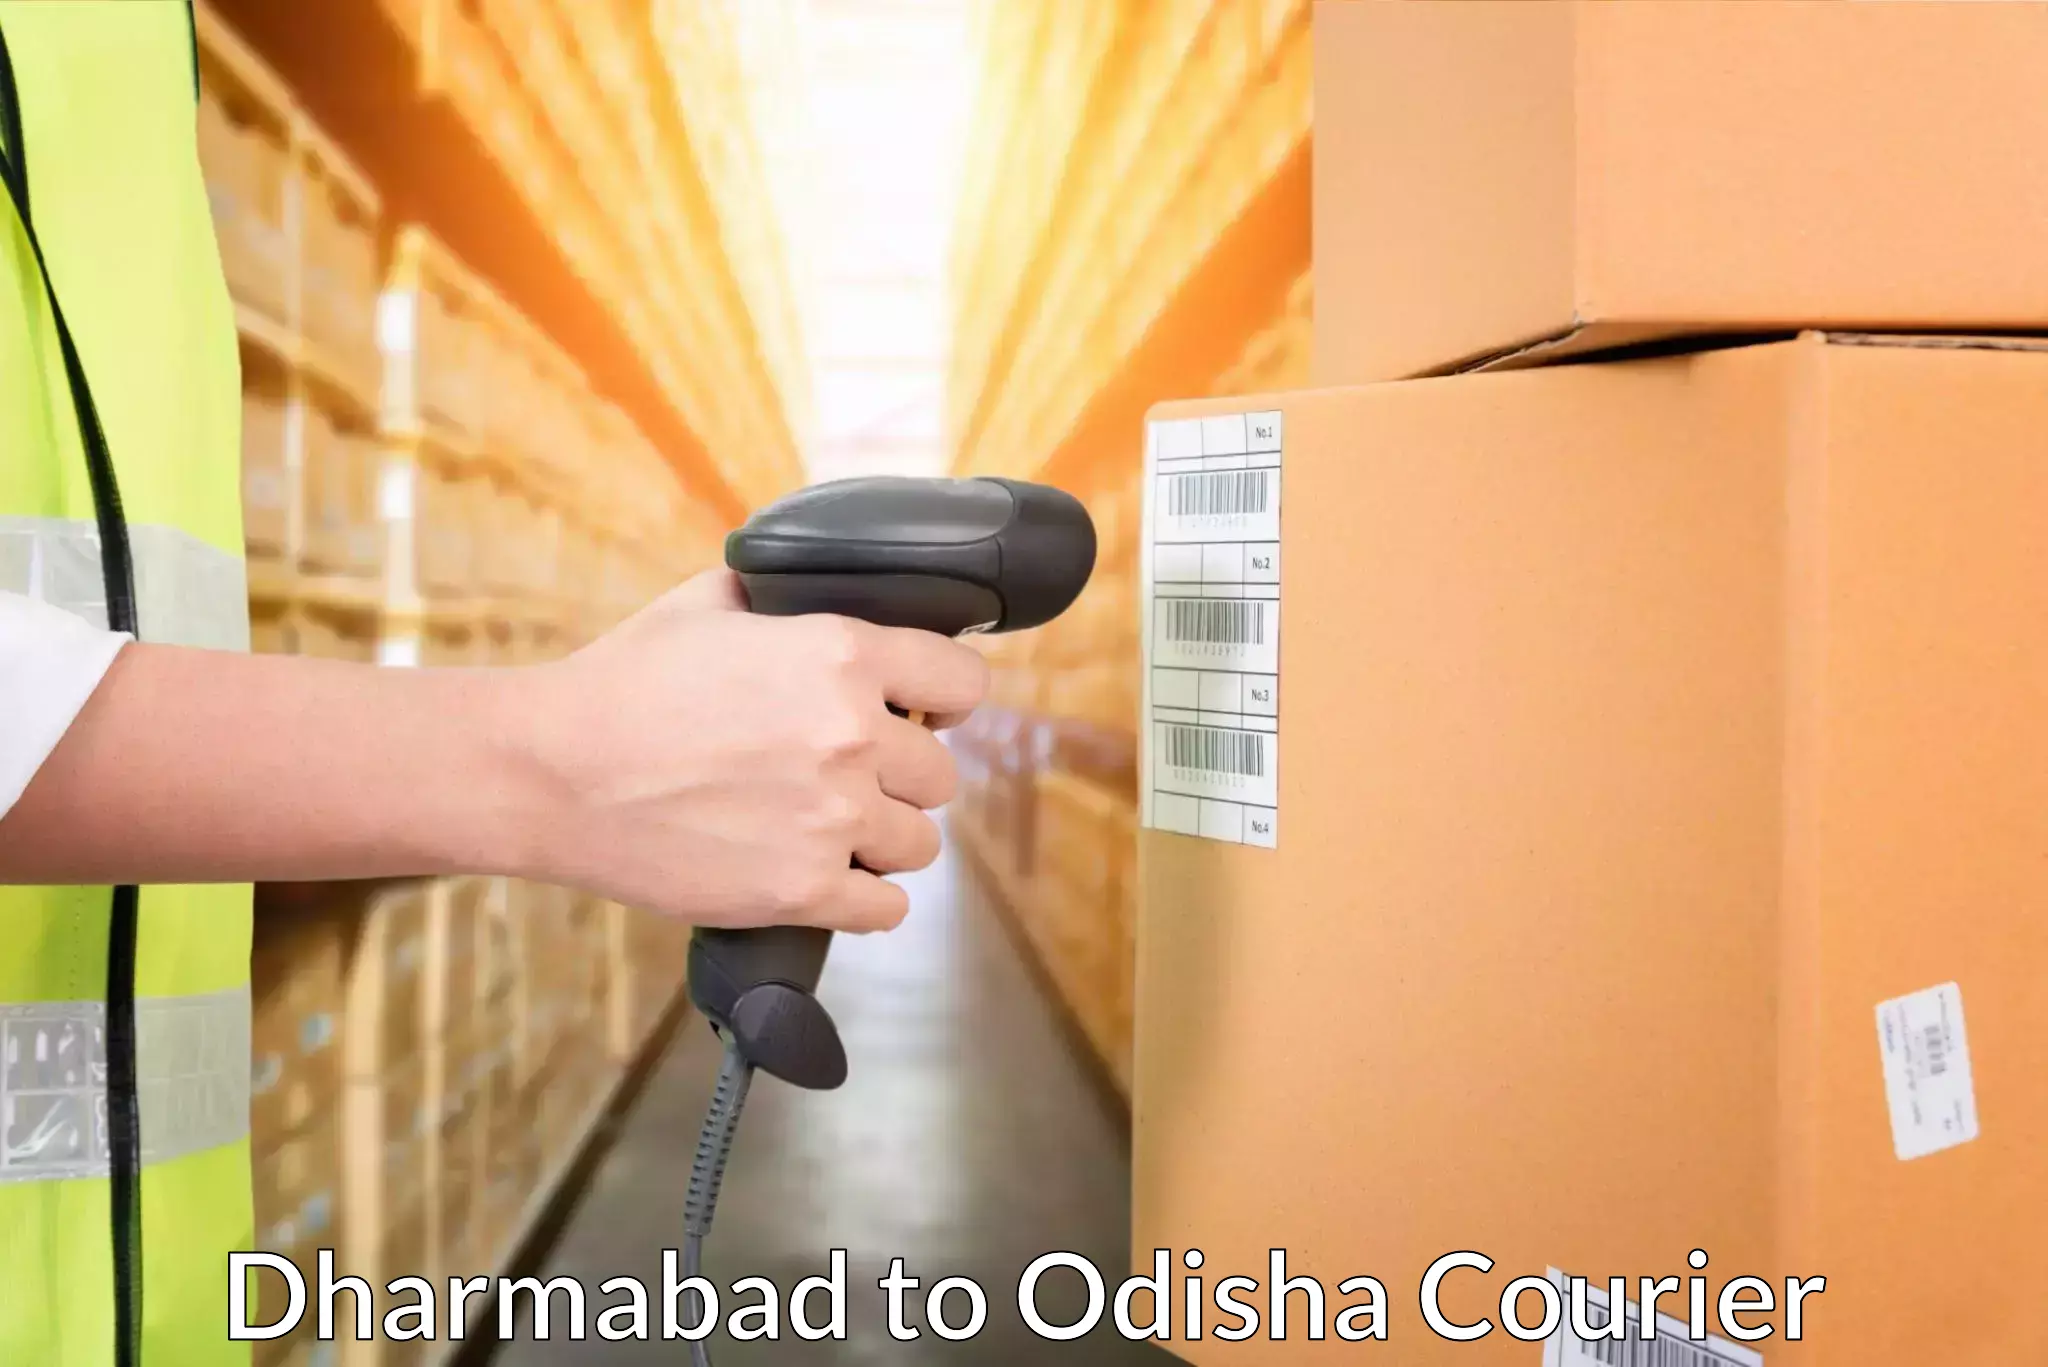 Efficient order fulfillment Dharmabad to Odisha